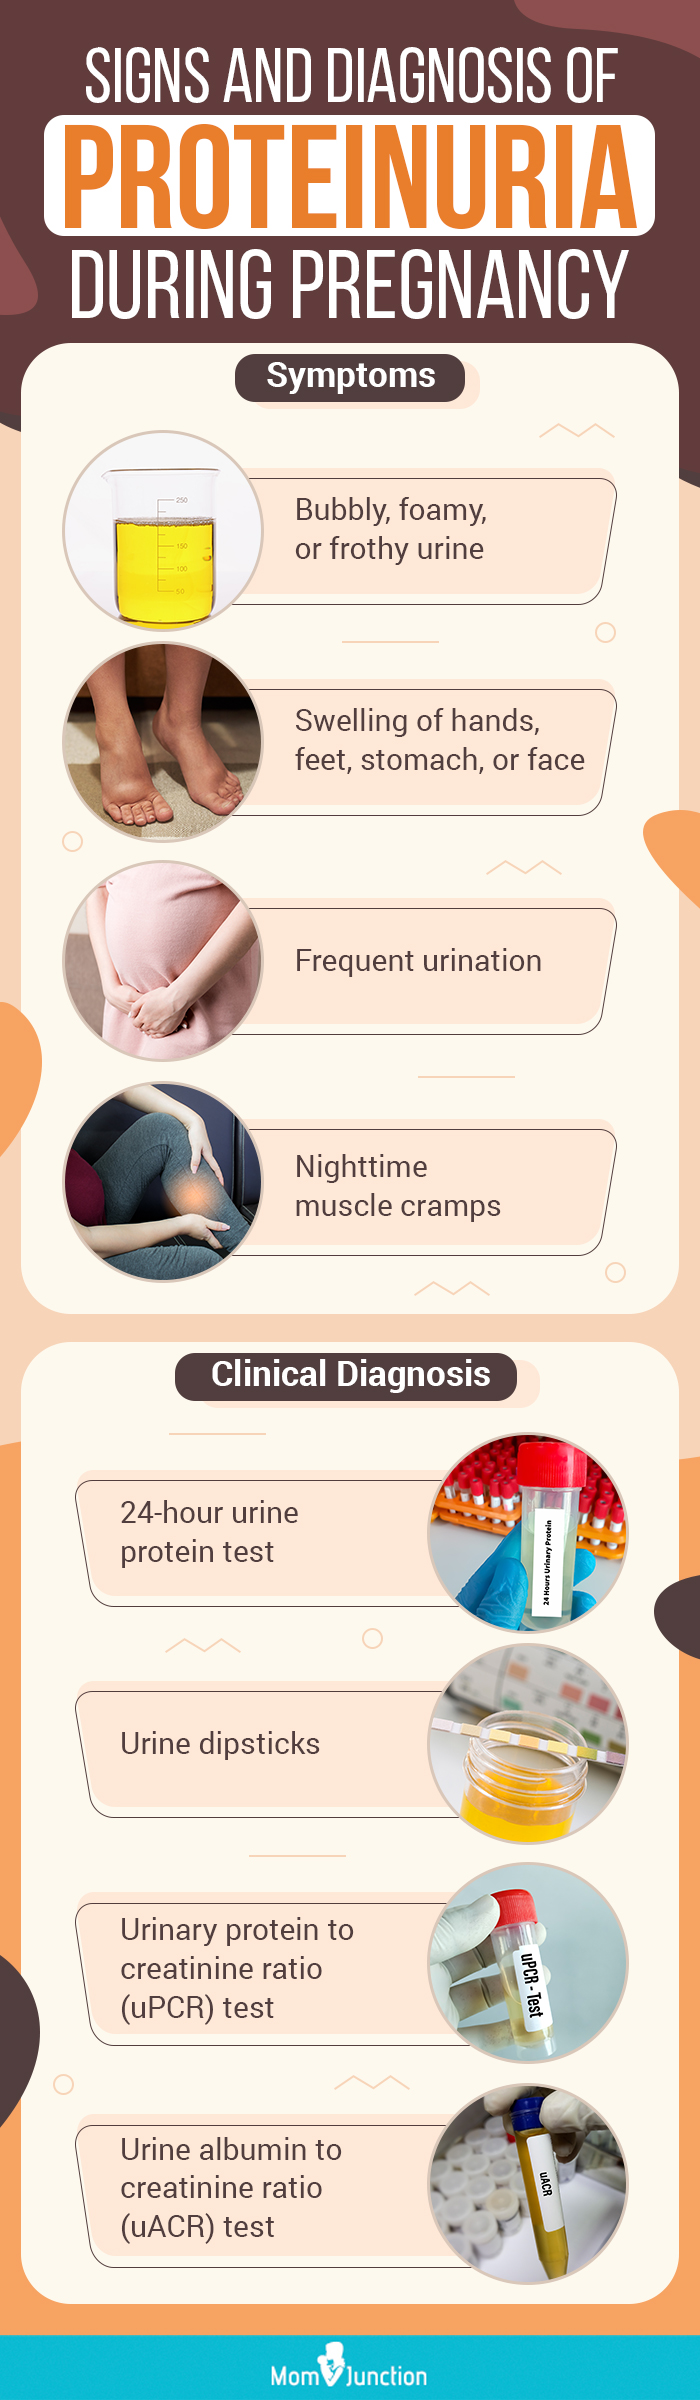 signs and diagnosis of proteinuria during pregnancy (infographic)